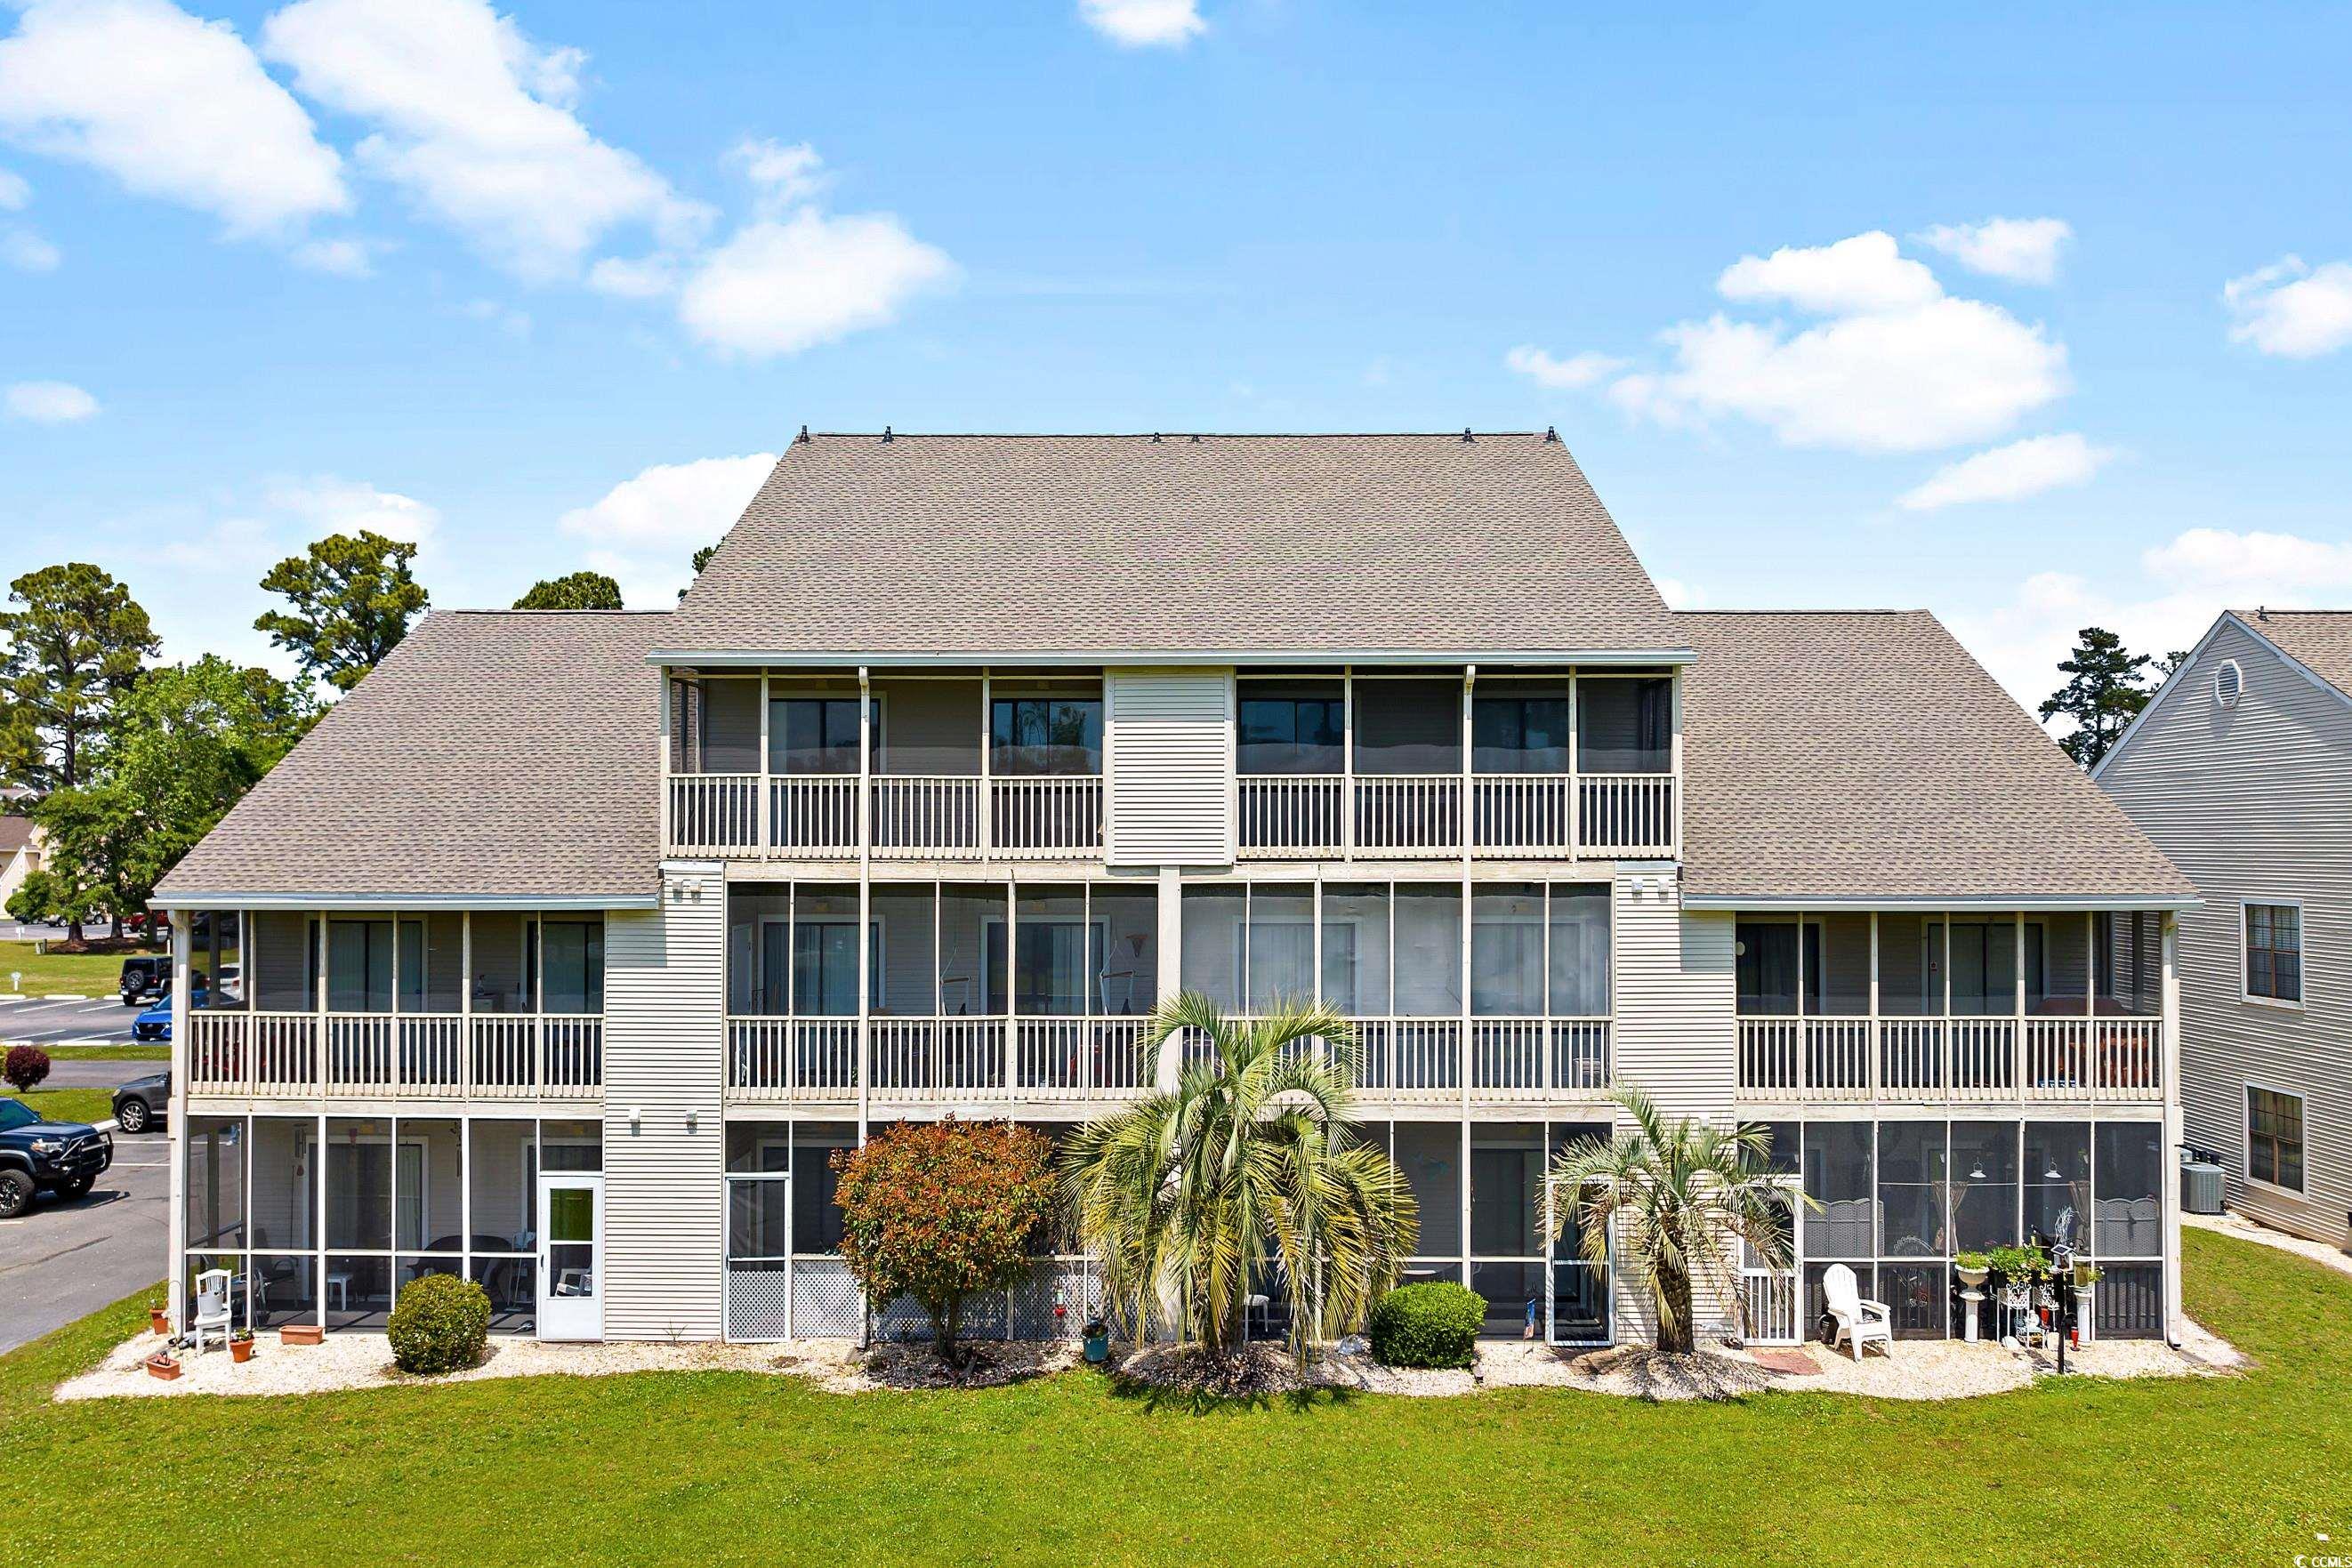 prime location, location, location!! on highway 9 in the booming little river area, approx. 1.9 miles to cherry grove beach!! very nice 2 bedroom / 2 full bathroom, spacious & private end unit condo with  large screened in  balcony deck in baytree! has a nice sitting room upon front door entry, that could also be used as an office, a sleeping room, kids play room, second living room area or many other possibilities.  this property is being sold fully  furnished and is turnkey ready! has vaulted ceilings, 2 sliding glass door balcony exits, 1 in living room and 1 off master bedroom. has 2 spacious storage rooms, 1 large storage room off back balcony and 1 extra-large walk in storage in breeze way by the front door, perfect for beach stuff, fishing equipment, tools, bicycles and much more! has low community hoa dues that include most all utilities, insurance, indoor pool, outdoor pool, hot tub jacuzzi, and more! would make an excellent primary residence, secondary beach home, or rental investment property! located only approx. 1.9 miles to cherry grove beach - north myrtle beach sc, in the emerging  little river area on hwy 9, across from hospital just before the cherry grove bridge. priced to sell, won’t last long! call agent to schedule showing: